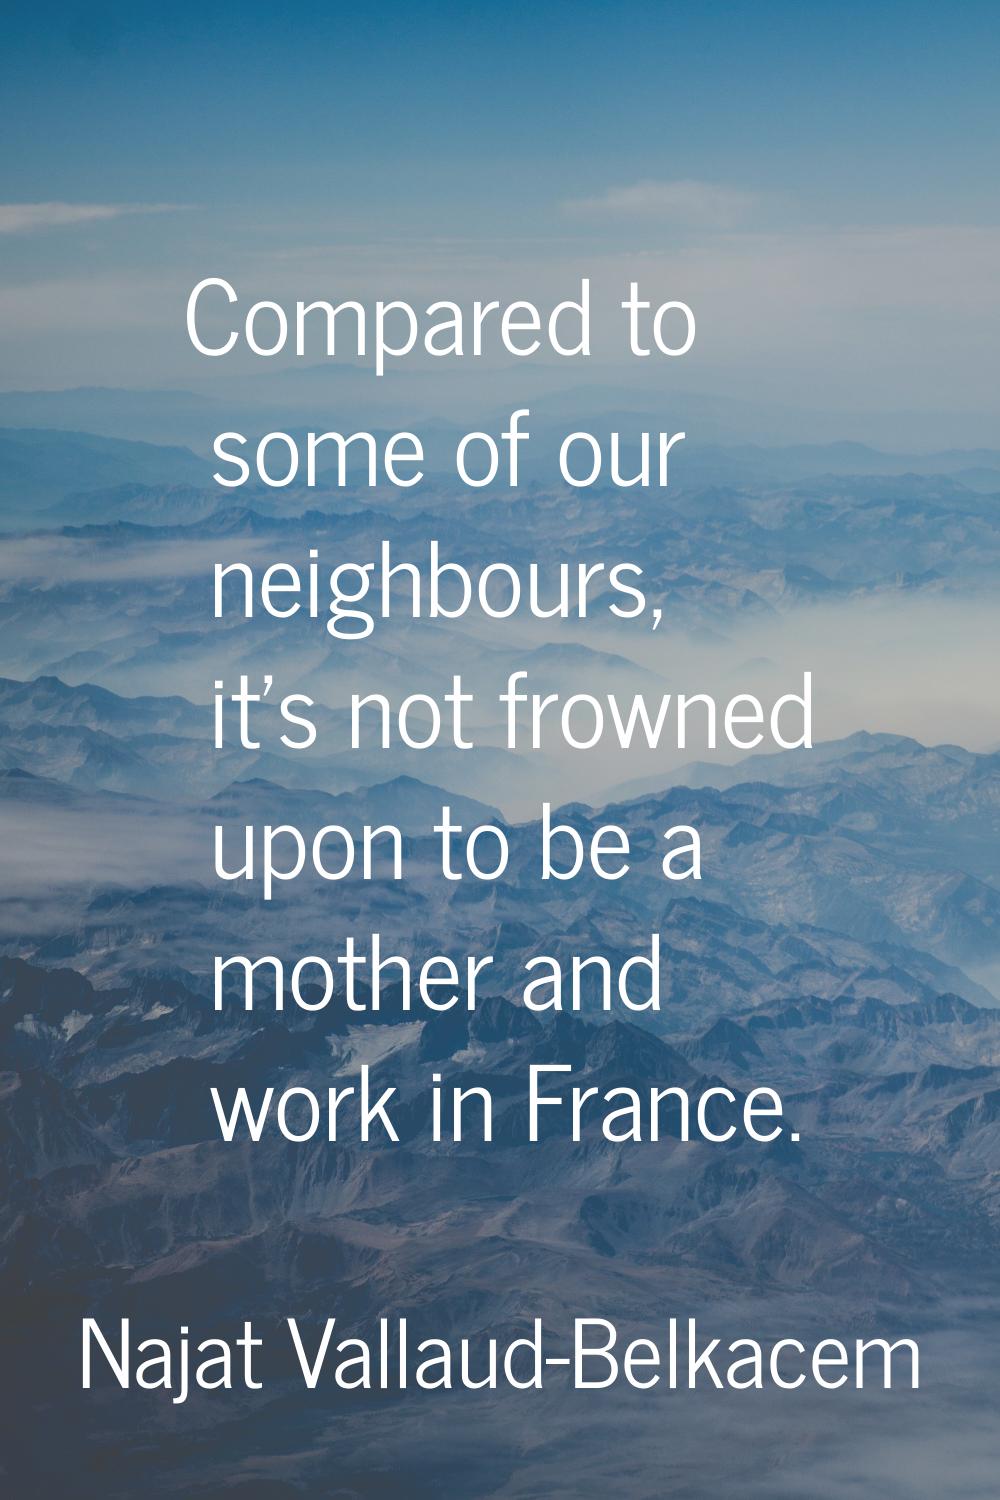 Compared to some of our neighbours, it's not frowned upon to be a mother and work in France.